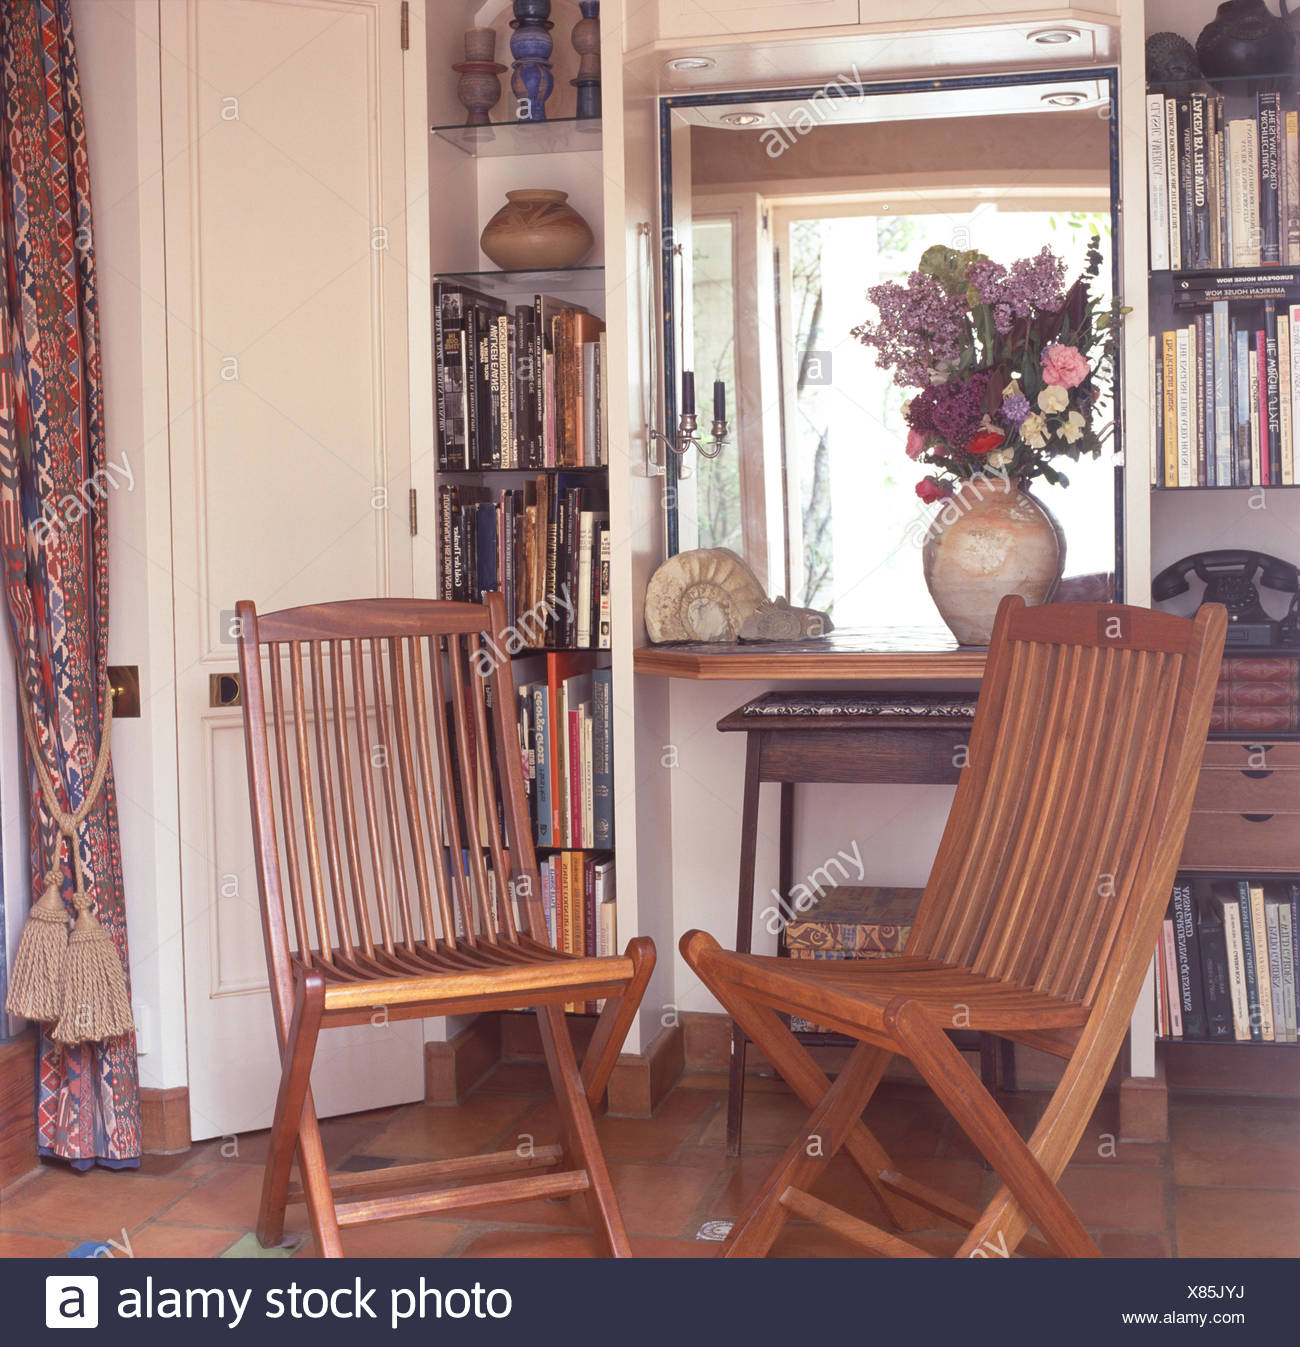 Slatted Wooden Chairs In Front Of A Small Window Between Narrow